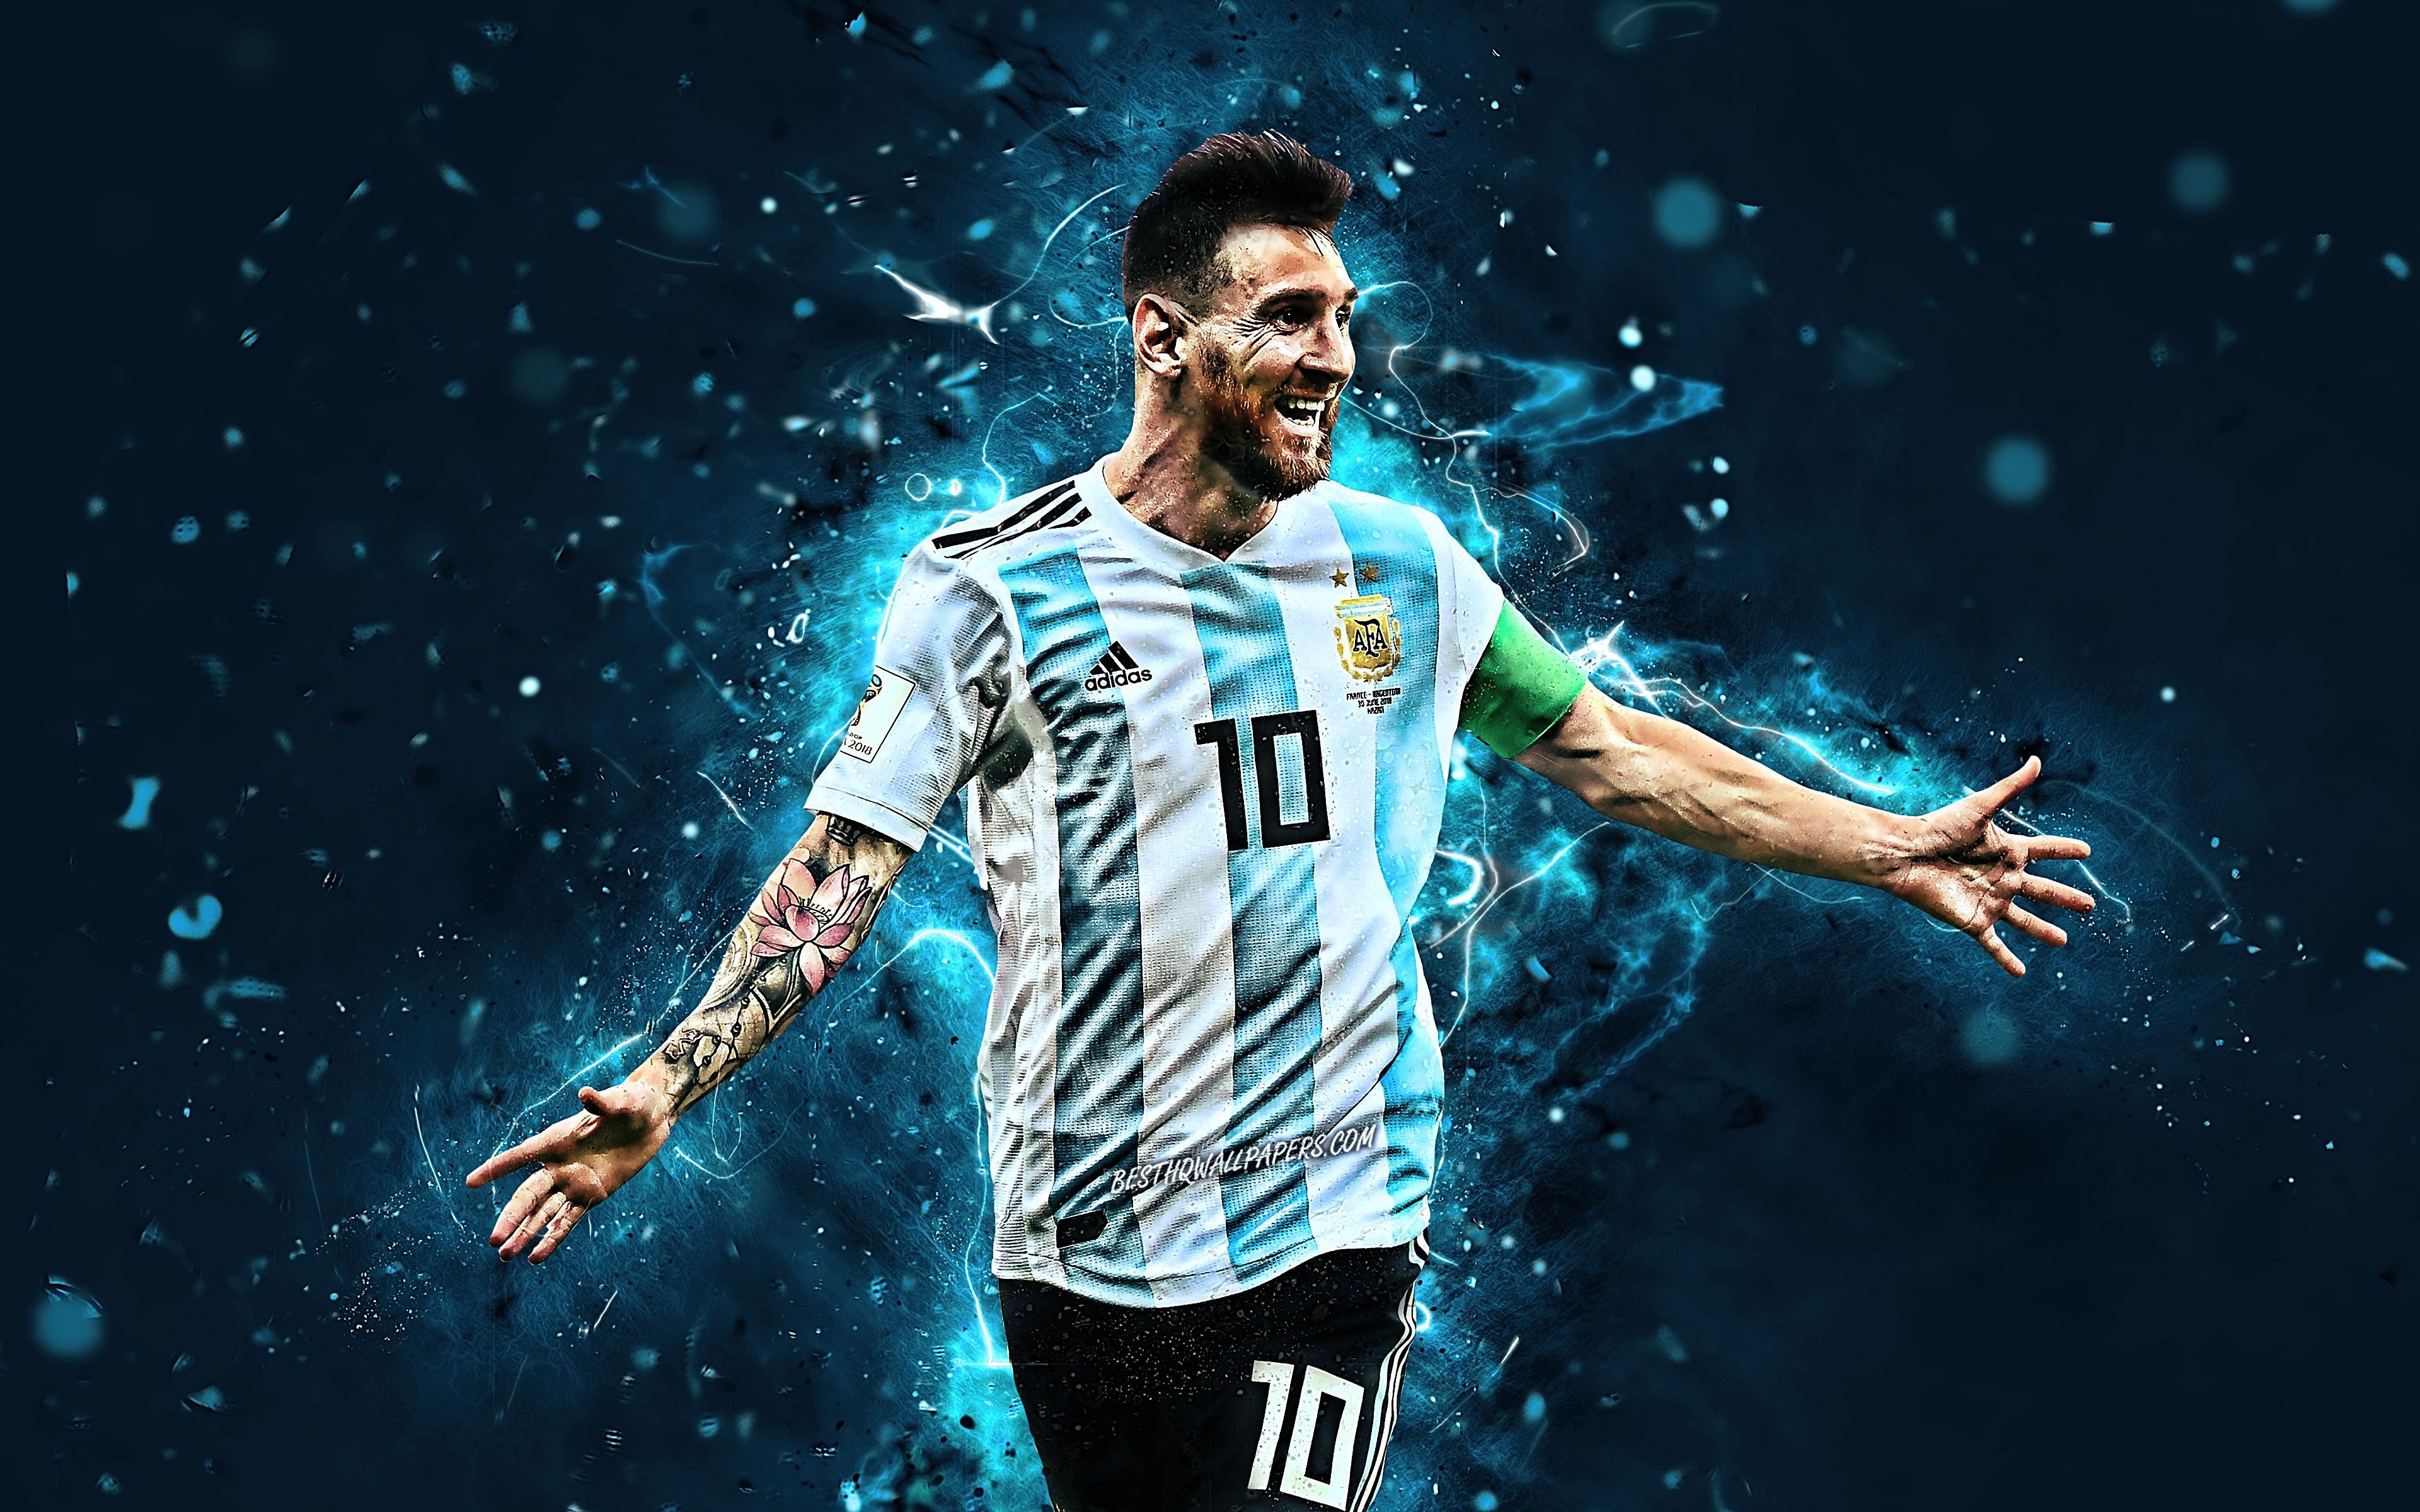 Argentina Lionel Messi PC Wallpapers - 4k, HD Argentina Lionel Messi PC